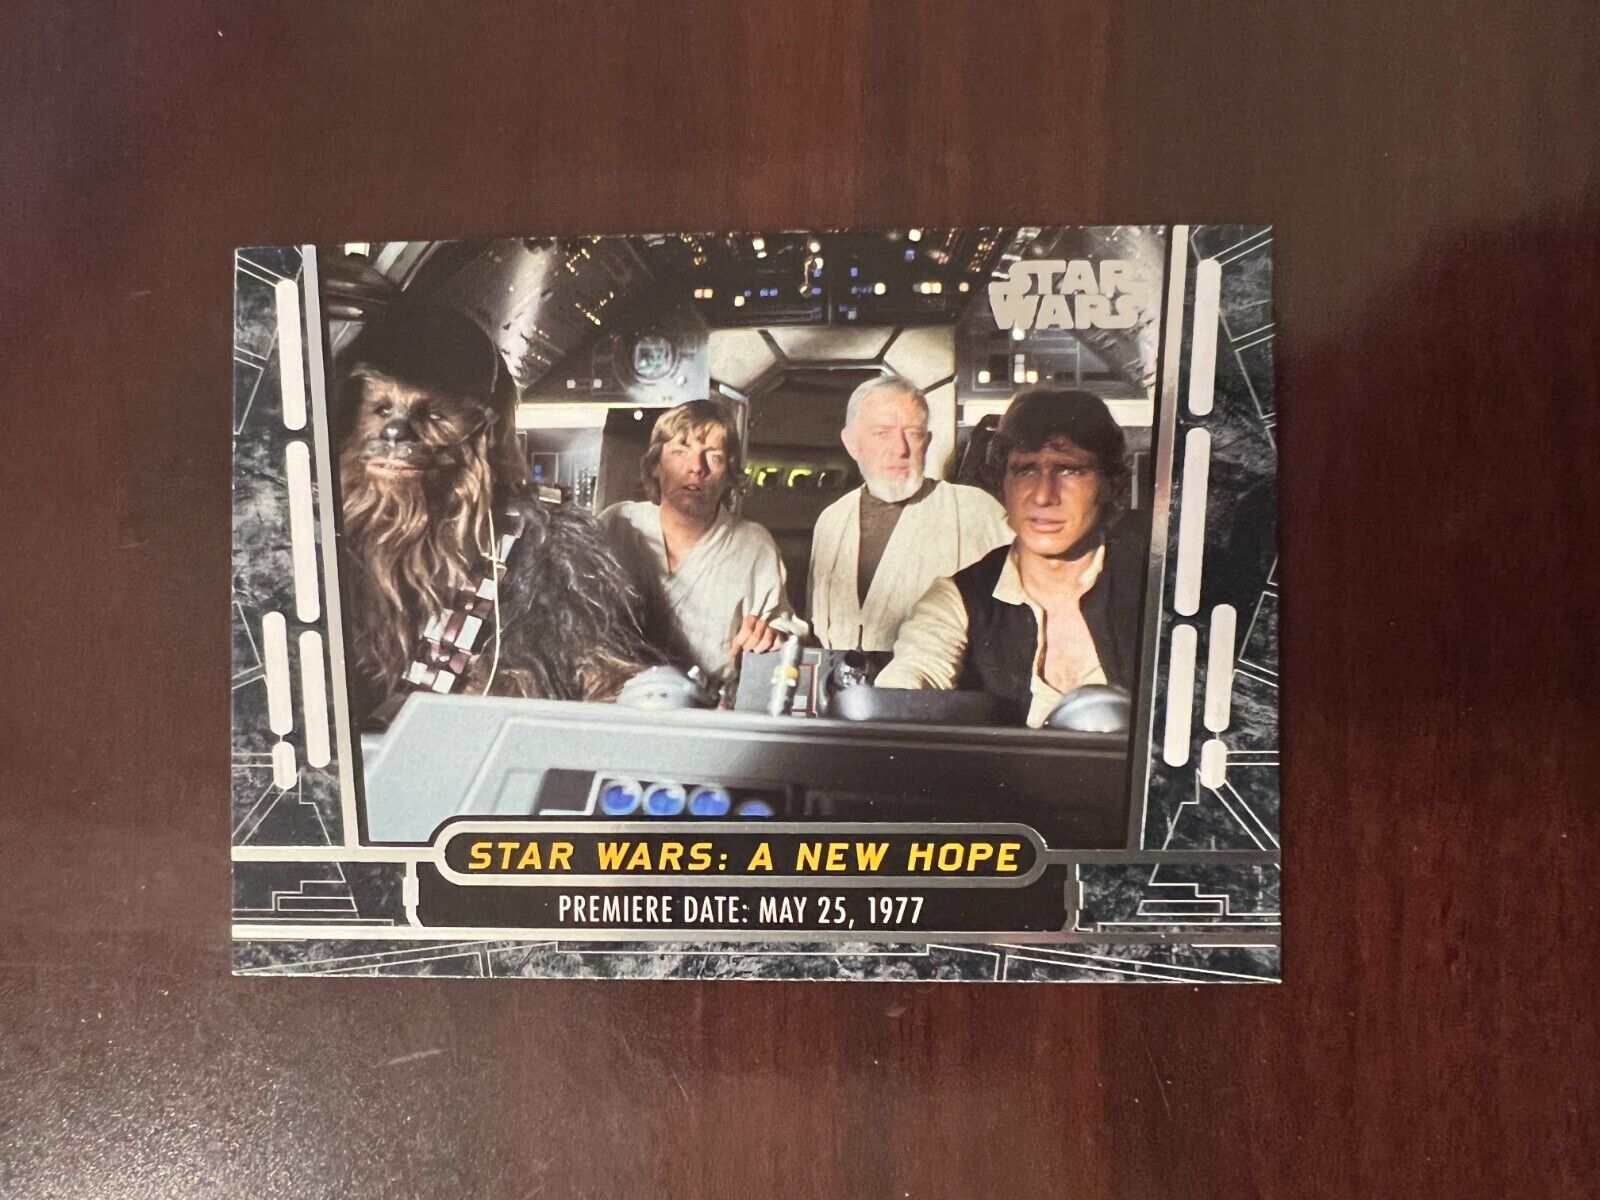 2017 Topps Star Wars 40th Anniversary Trading Card Complete Your Set U Pick BASE